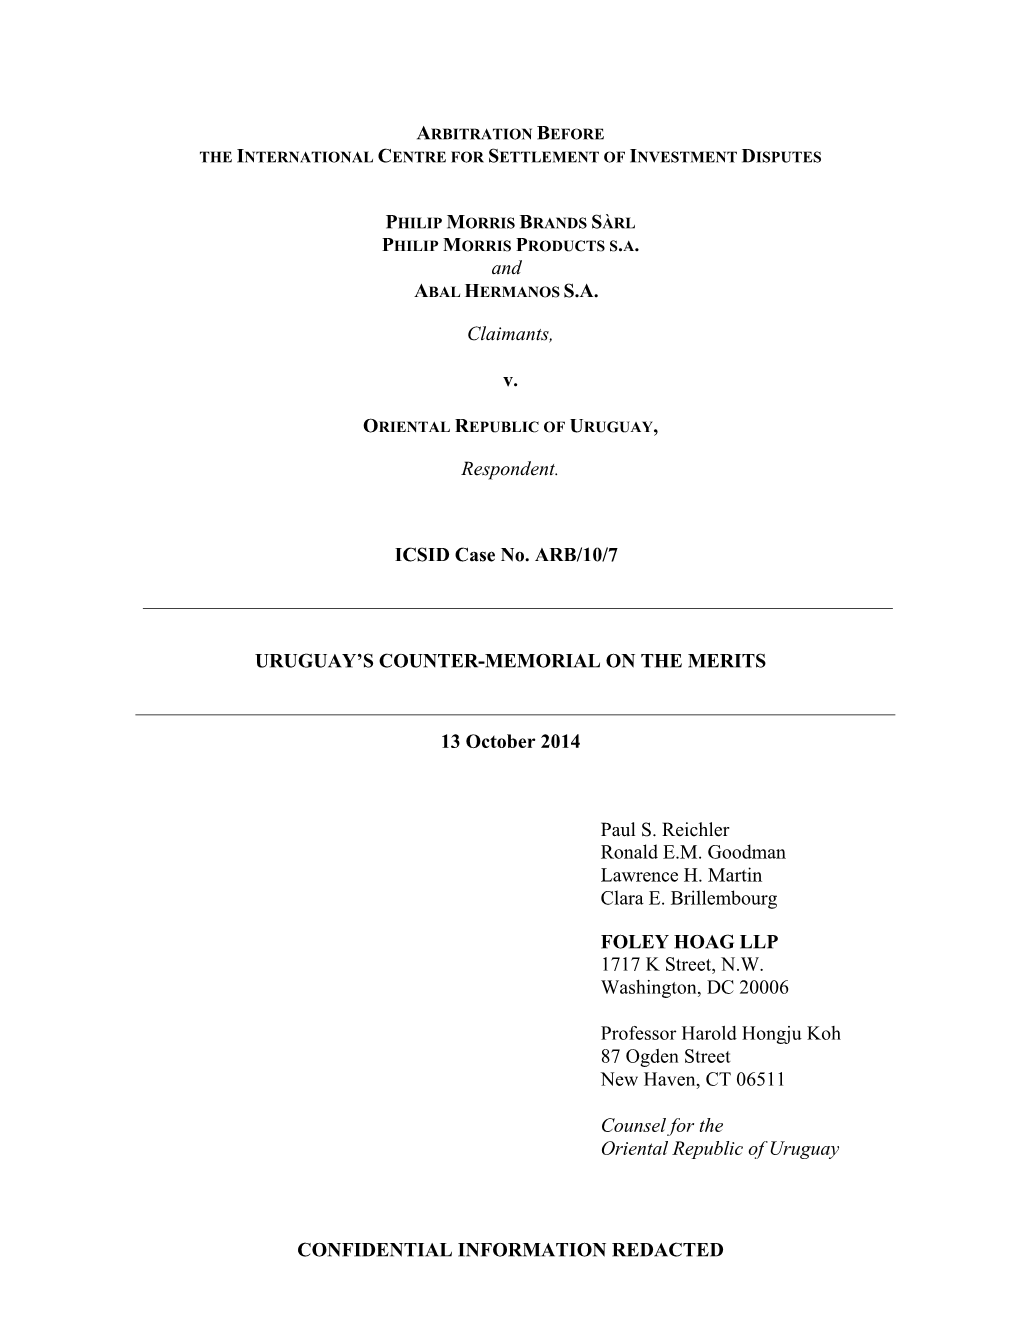 CONFIDENTIAL INFORMATION REDACTED and Claimants, V. Respondent. ICSID Case No. ARB/10/7 URUGUAY's COUNTER-MEMORIAL on THE